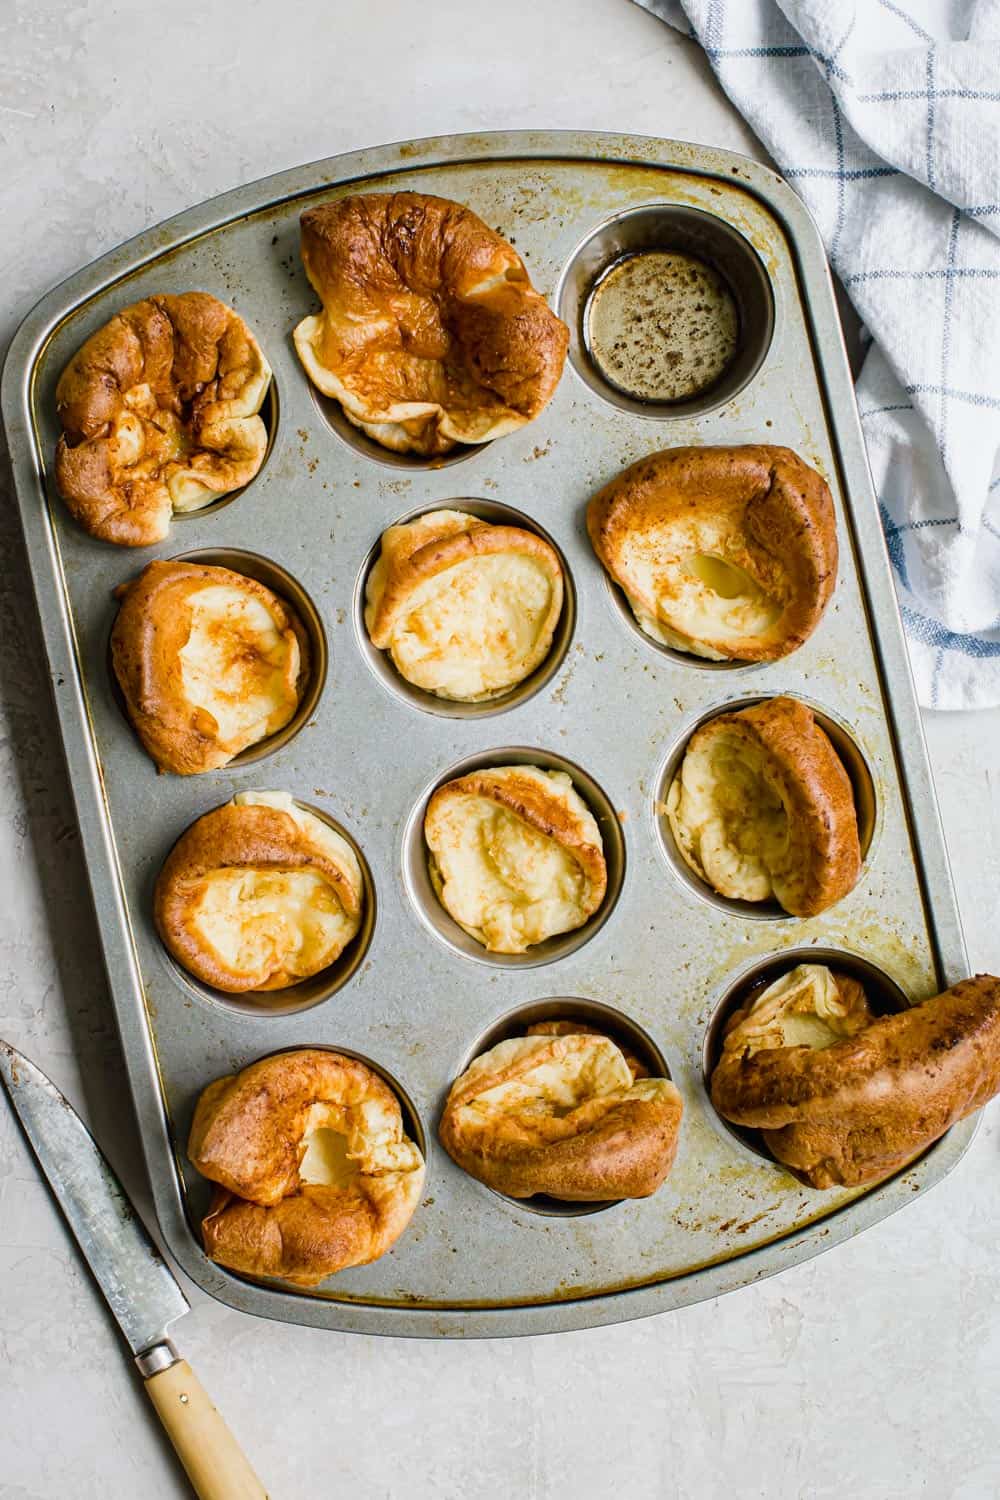 Easy Yorkshire pudding in a muffin tin.